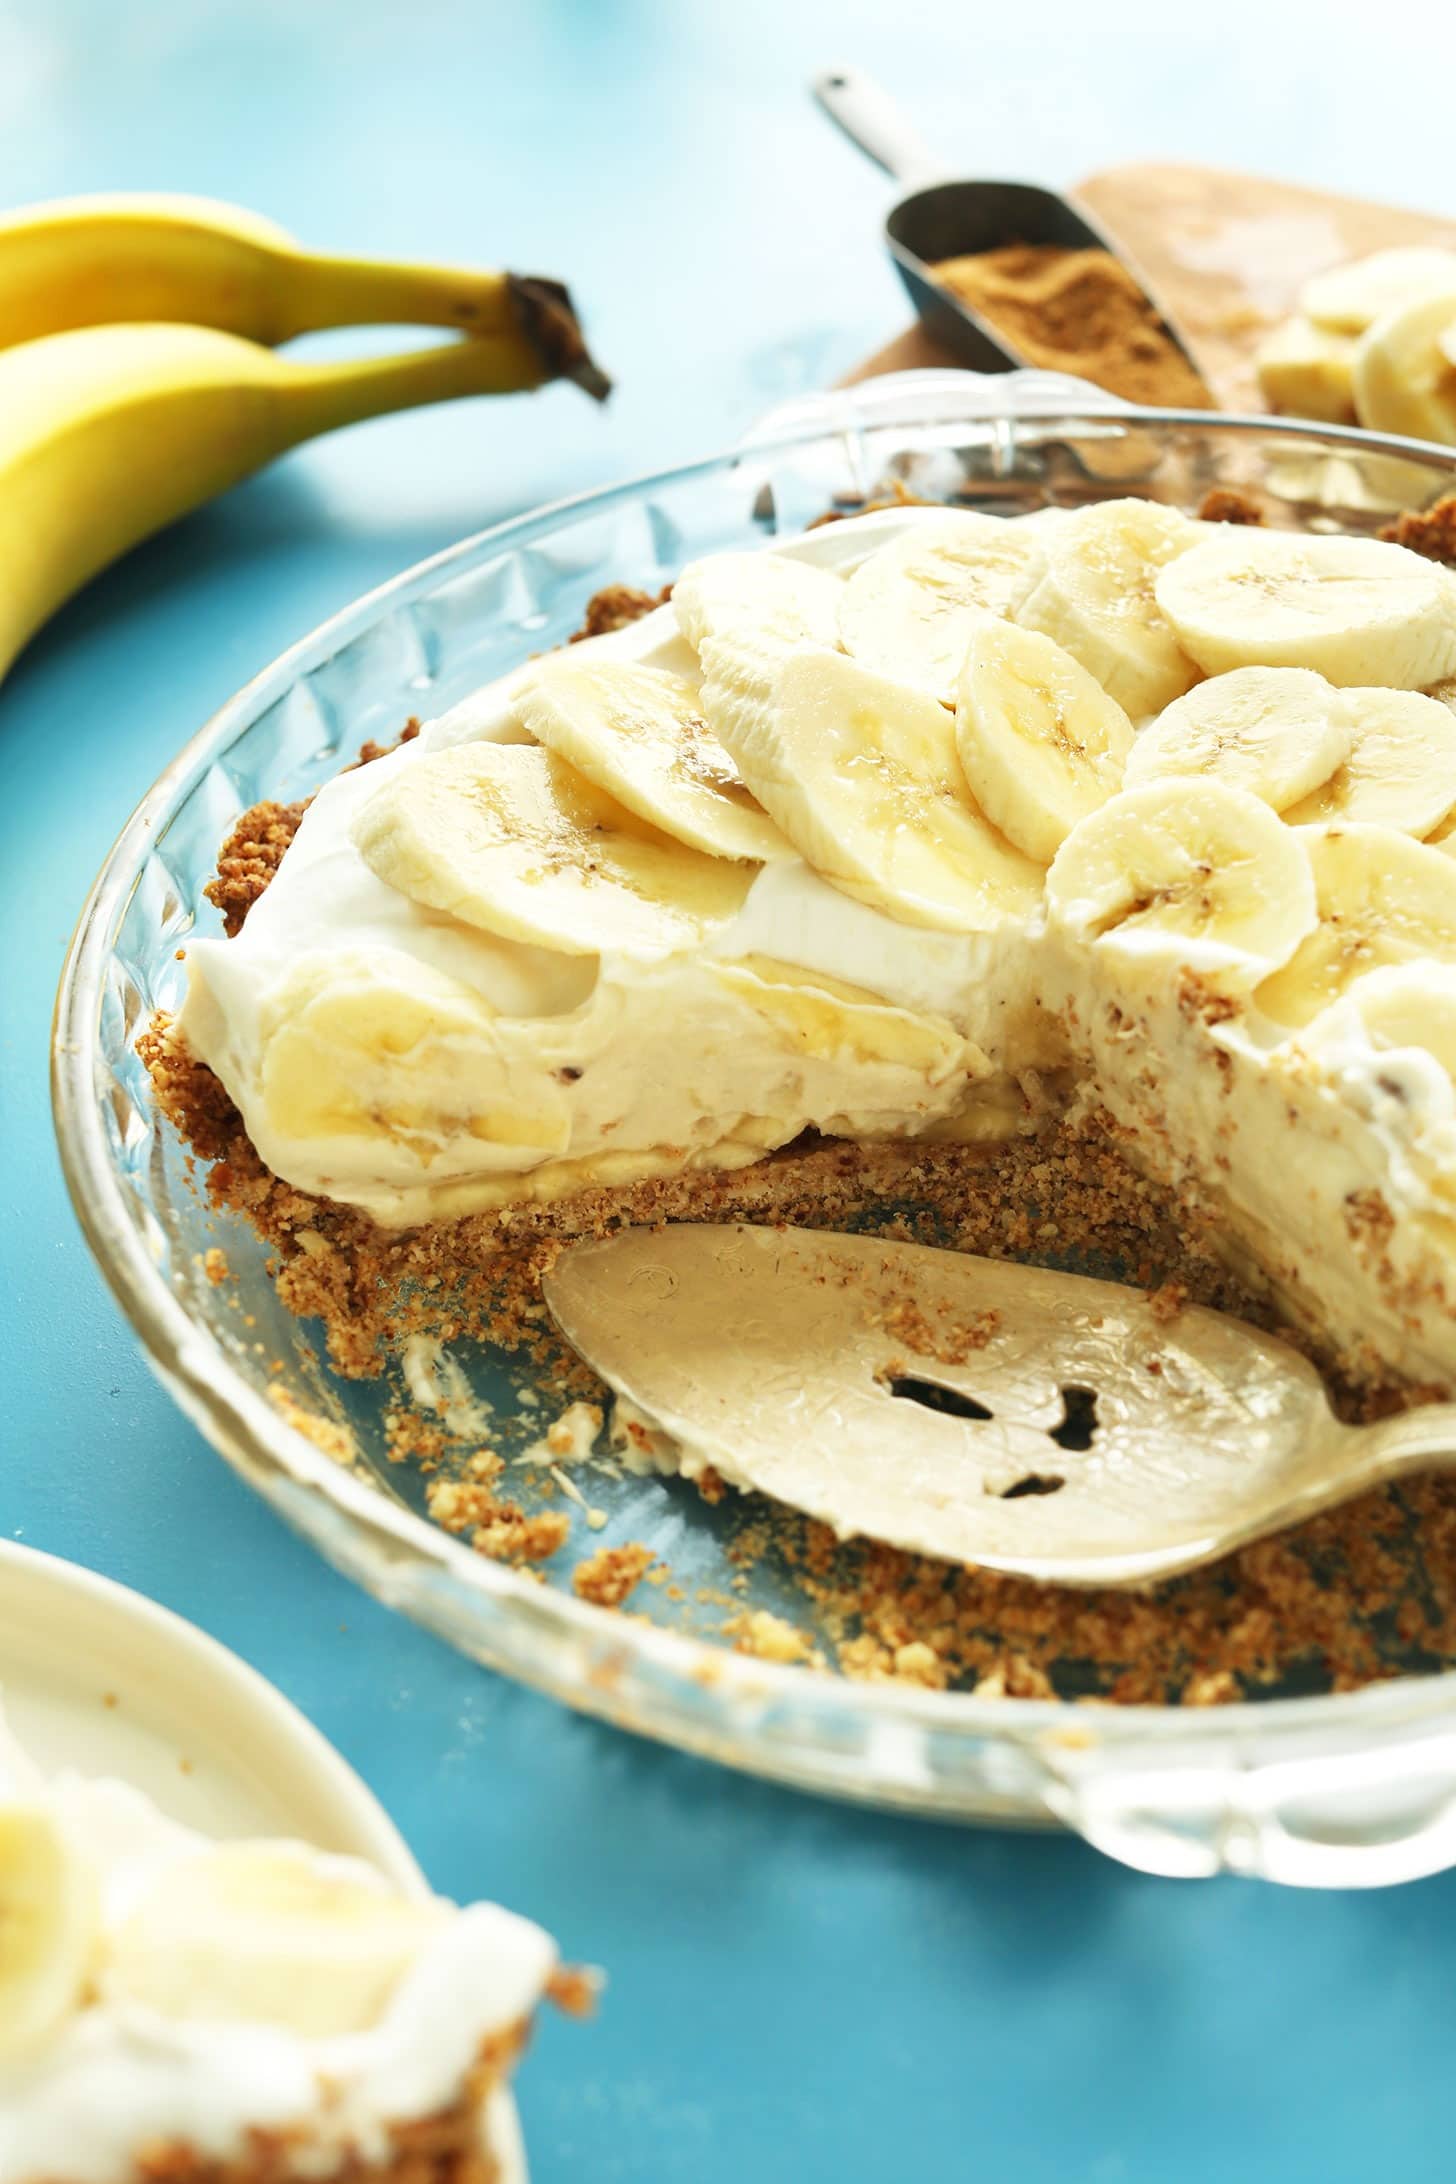 Cream pie topped with slices of fresh bananas.